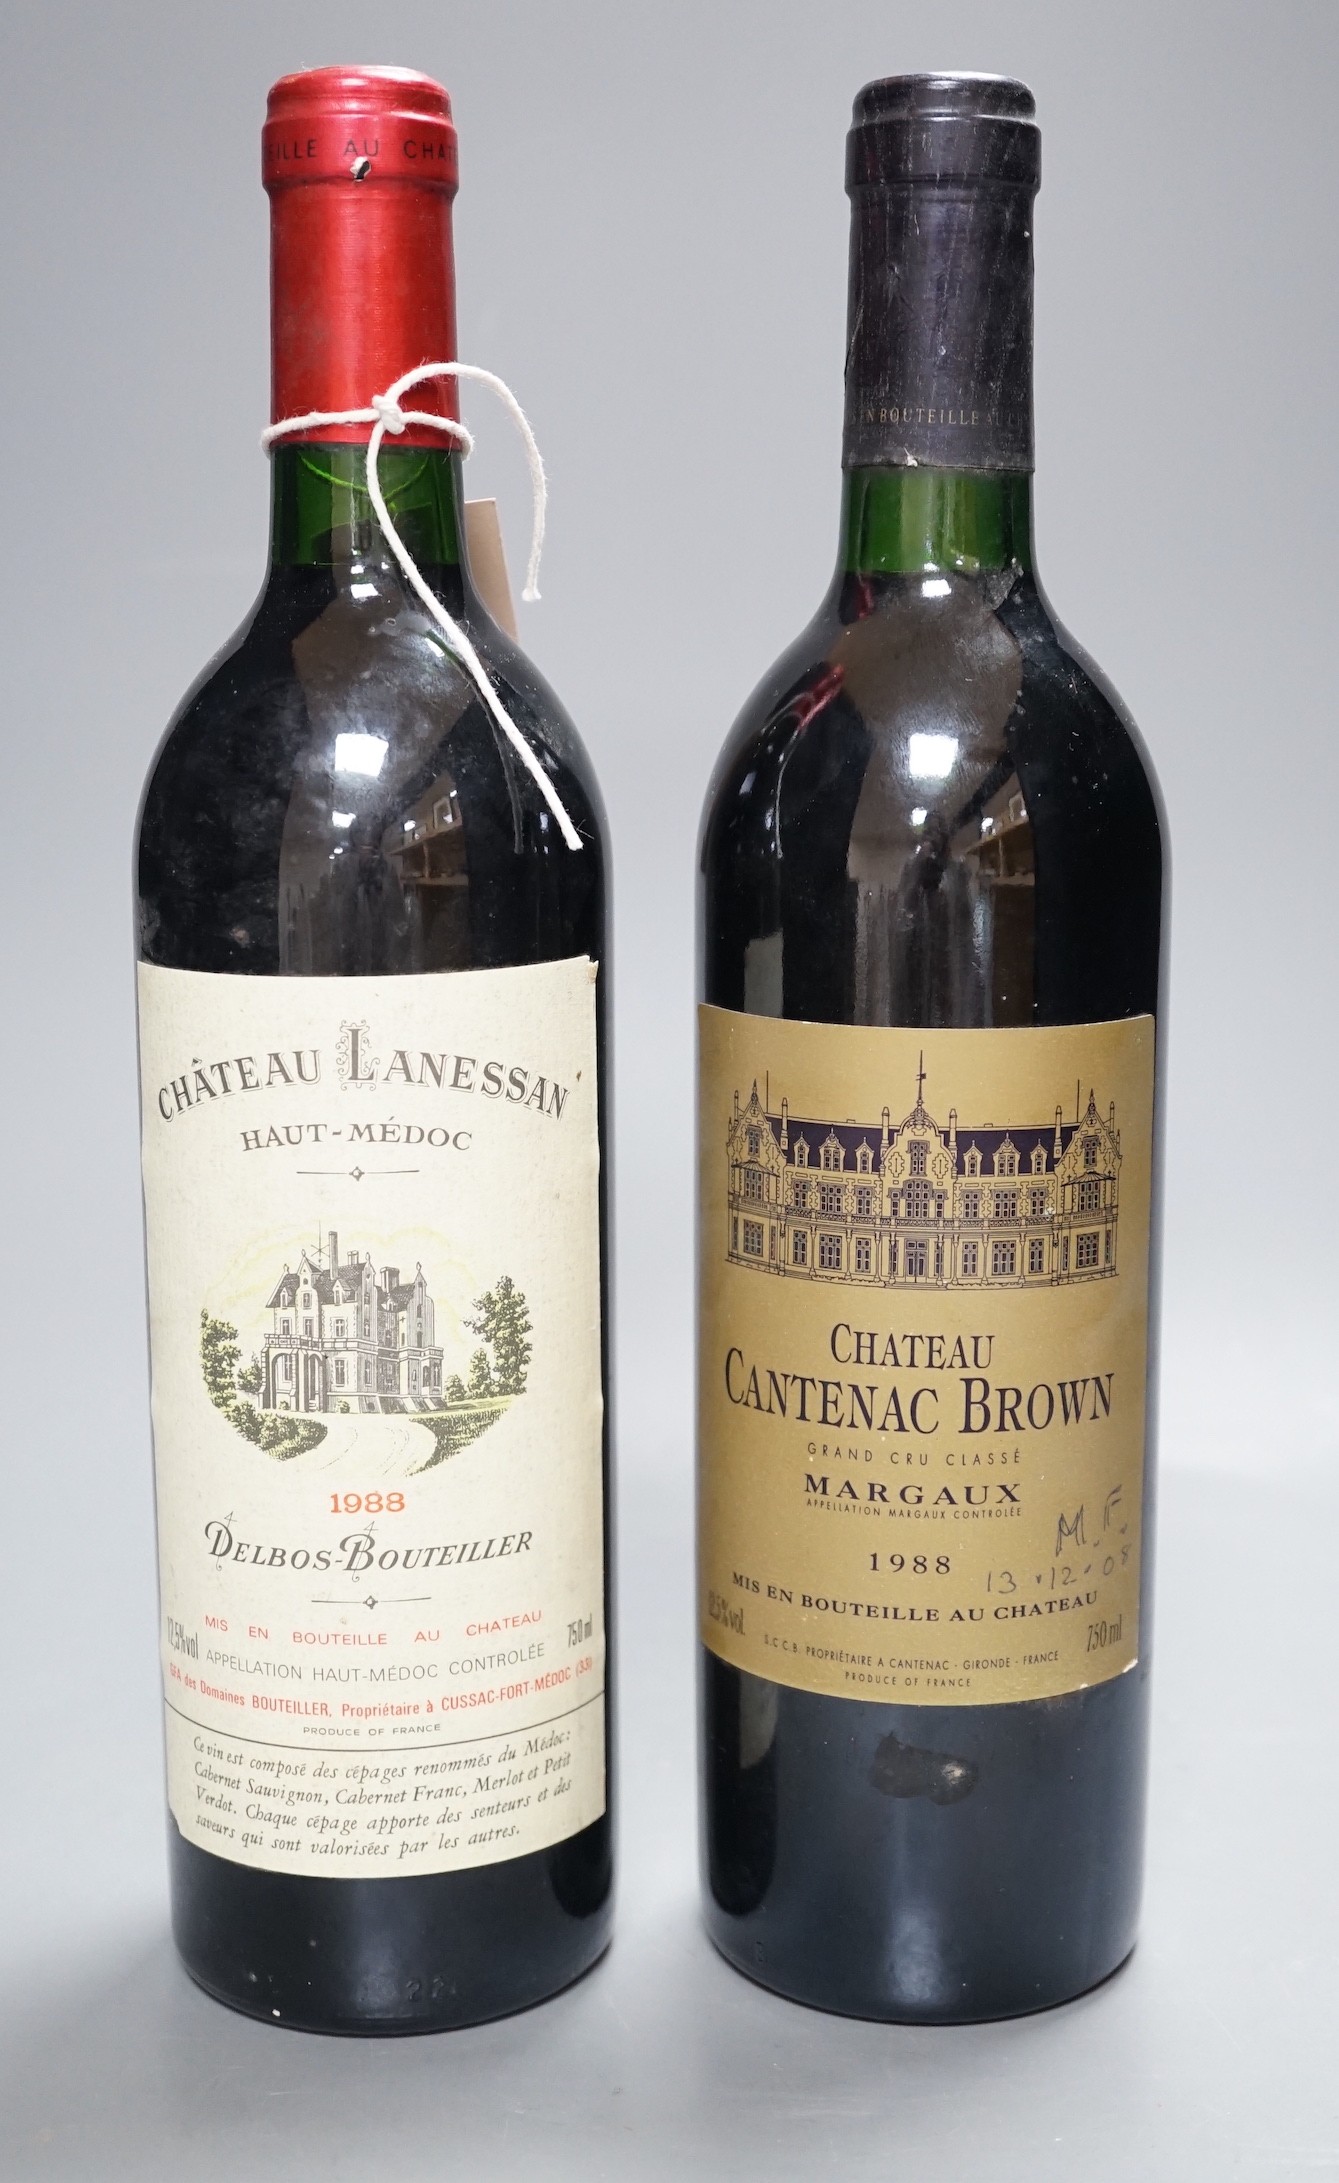 Two bottles of 1988 French wine; 750ml of Château Lanessan Delbos-Bouteiller Haut-Médoc and a 750ml of Chateau Cantenac Brown Margaux